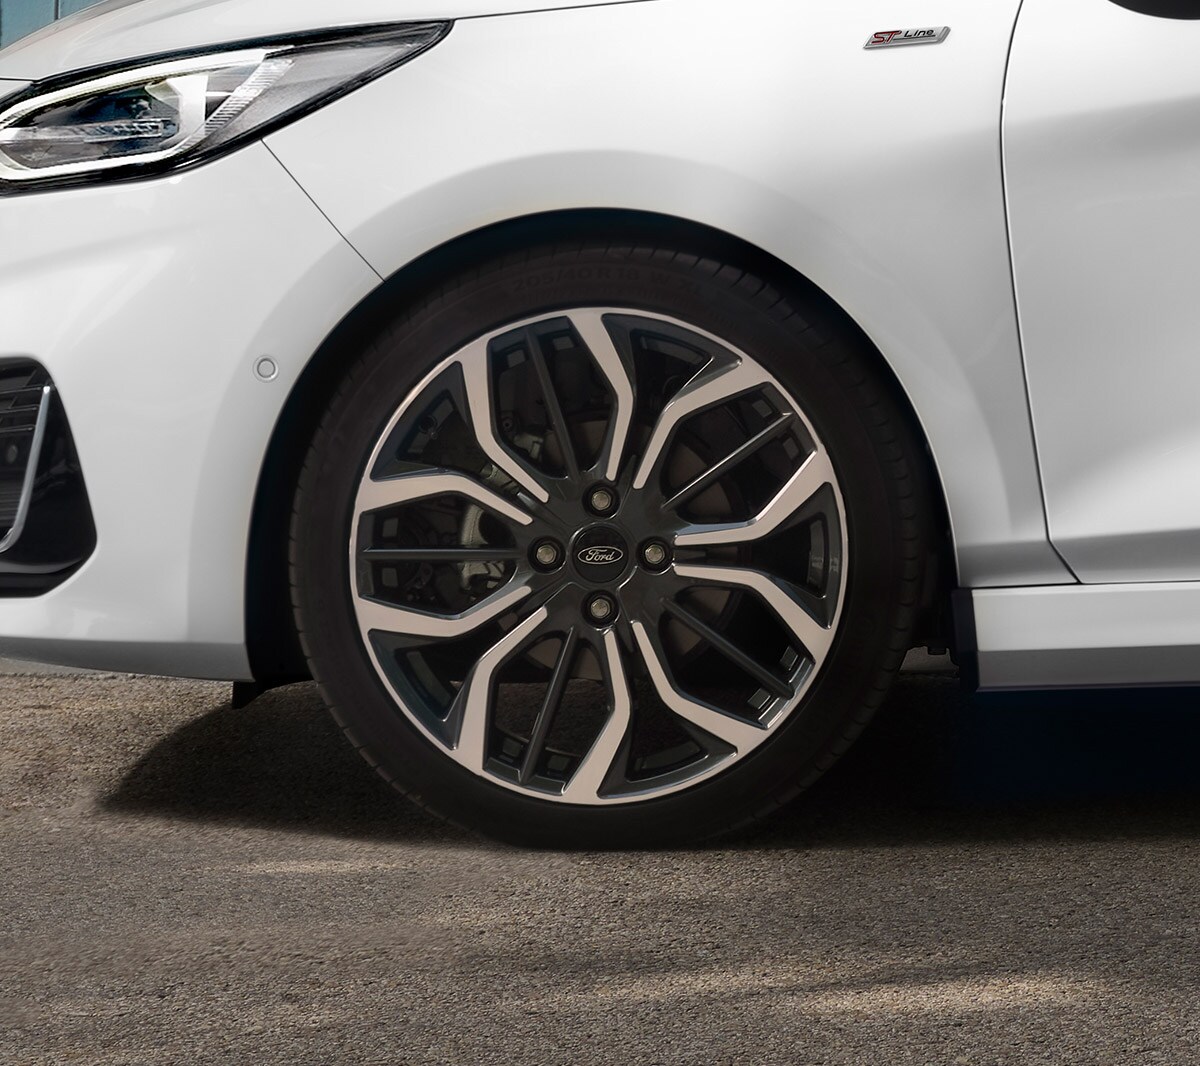 Ford Fiesta exclusive alloy wheel close up